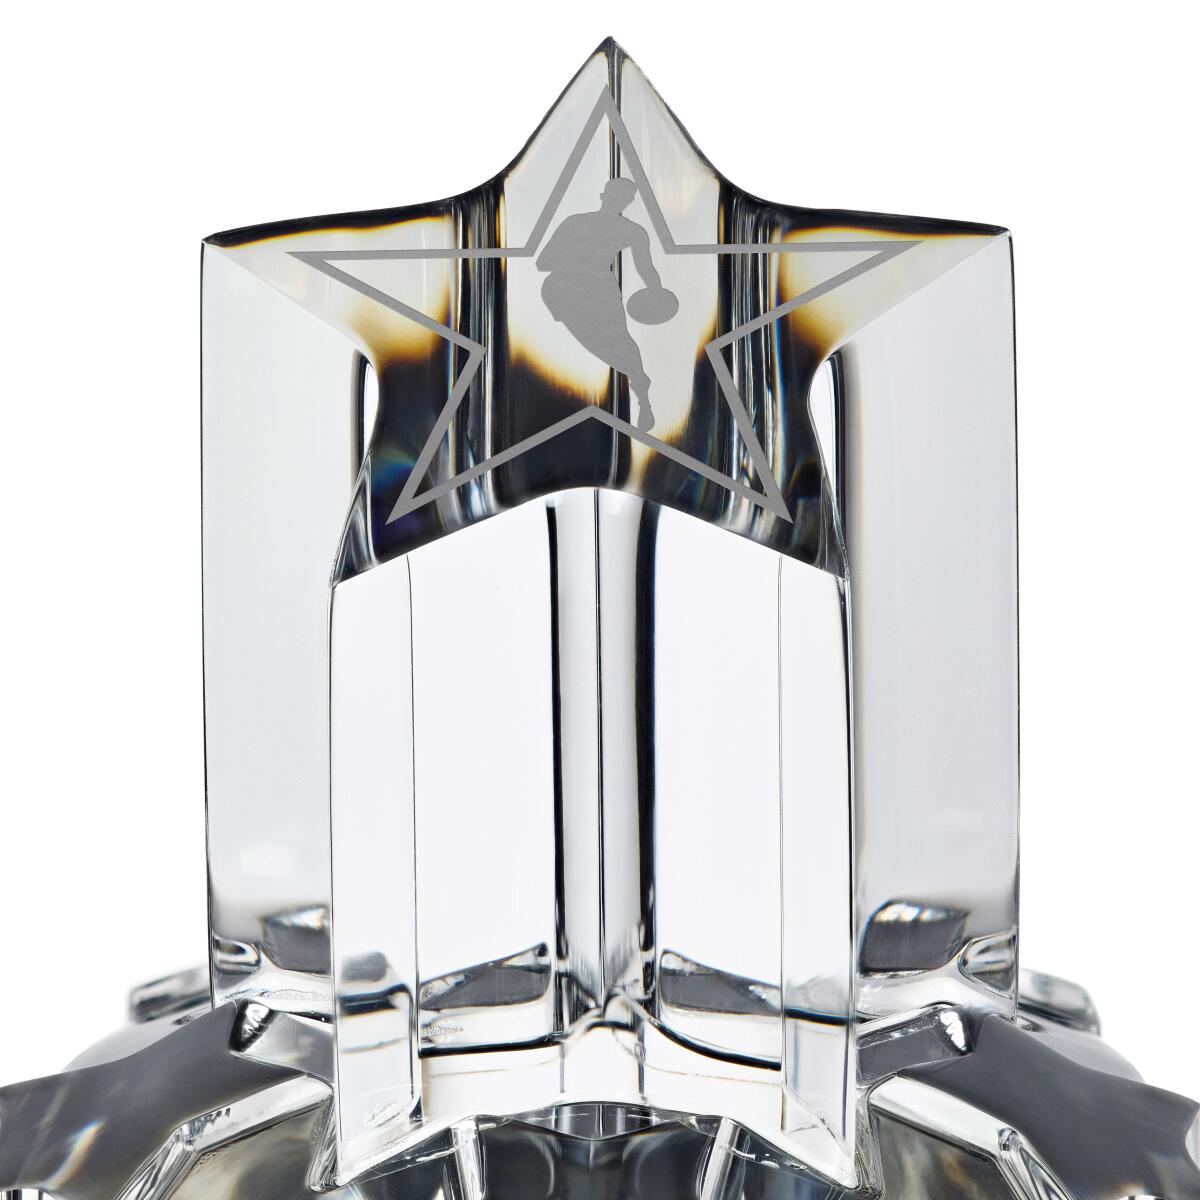 The new All-Star game MVP trophy named after Kobe Bryant.